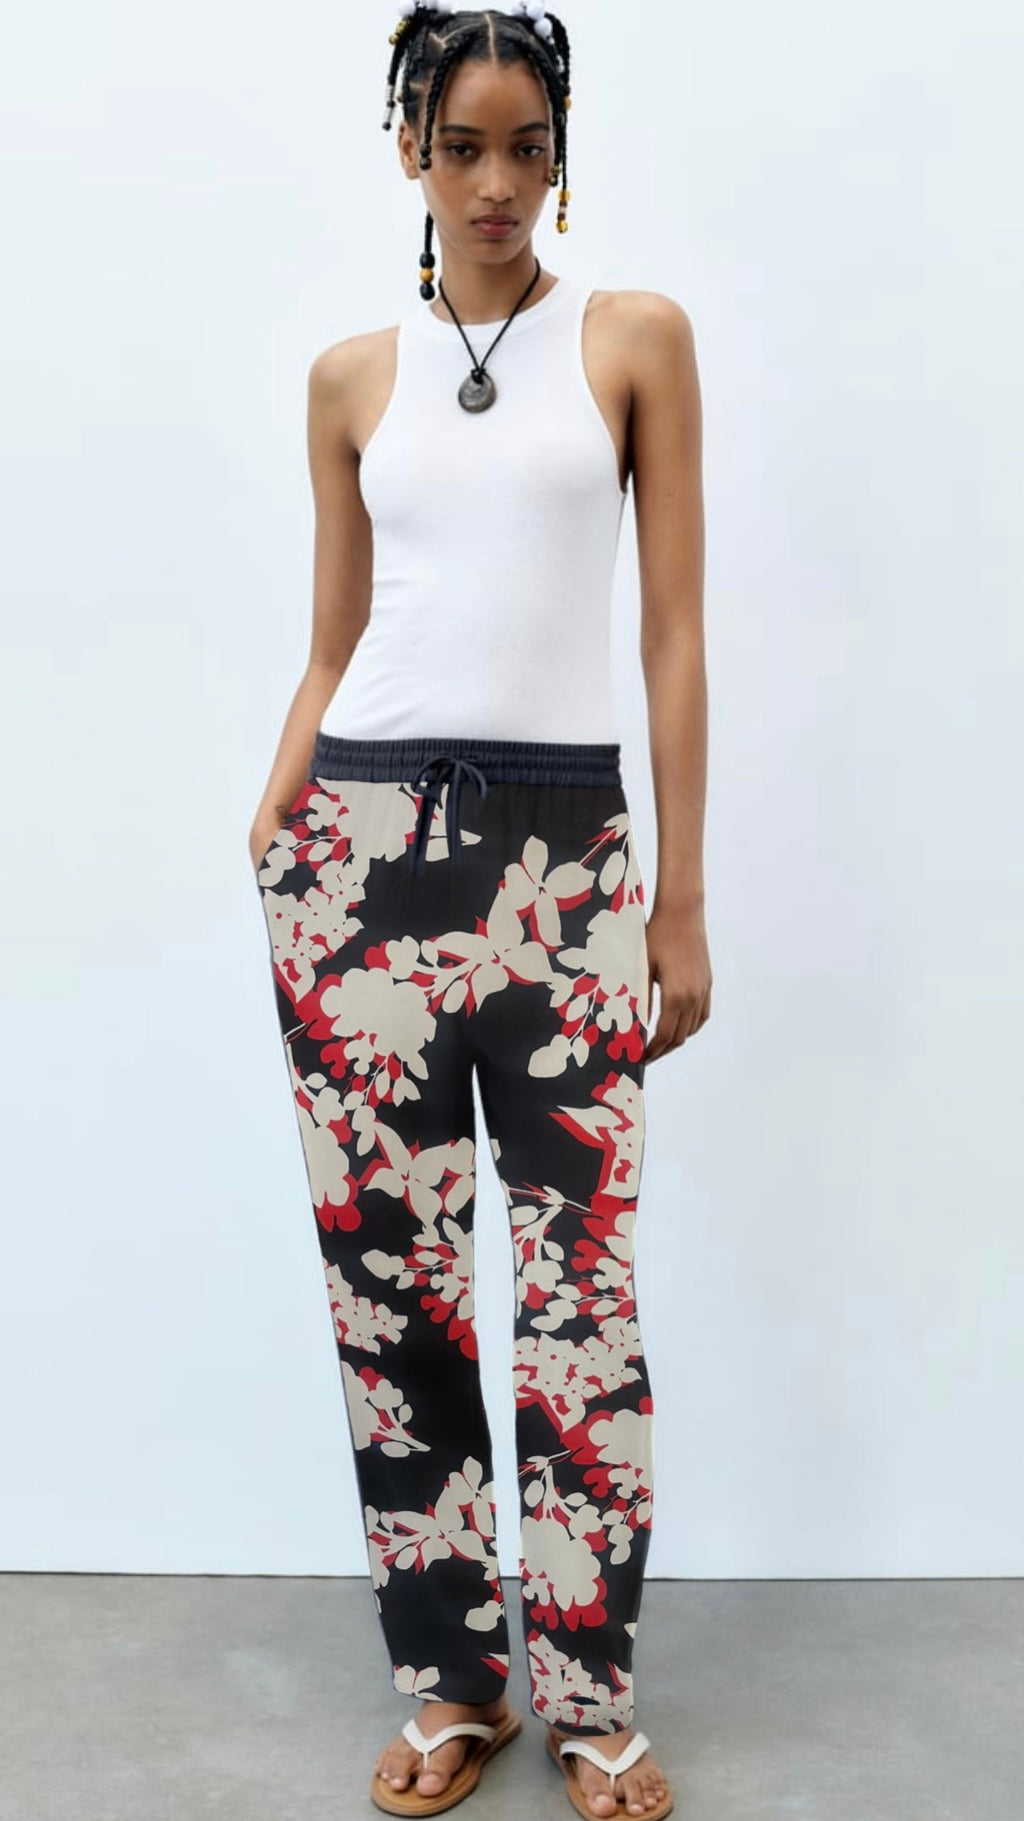 Graphic Floral Print ITY - Balck, White & Red